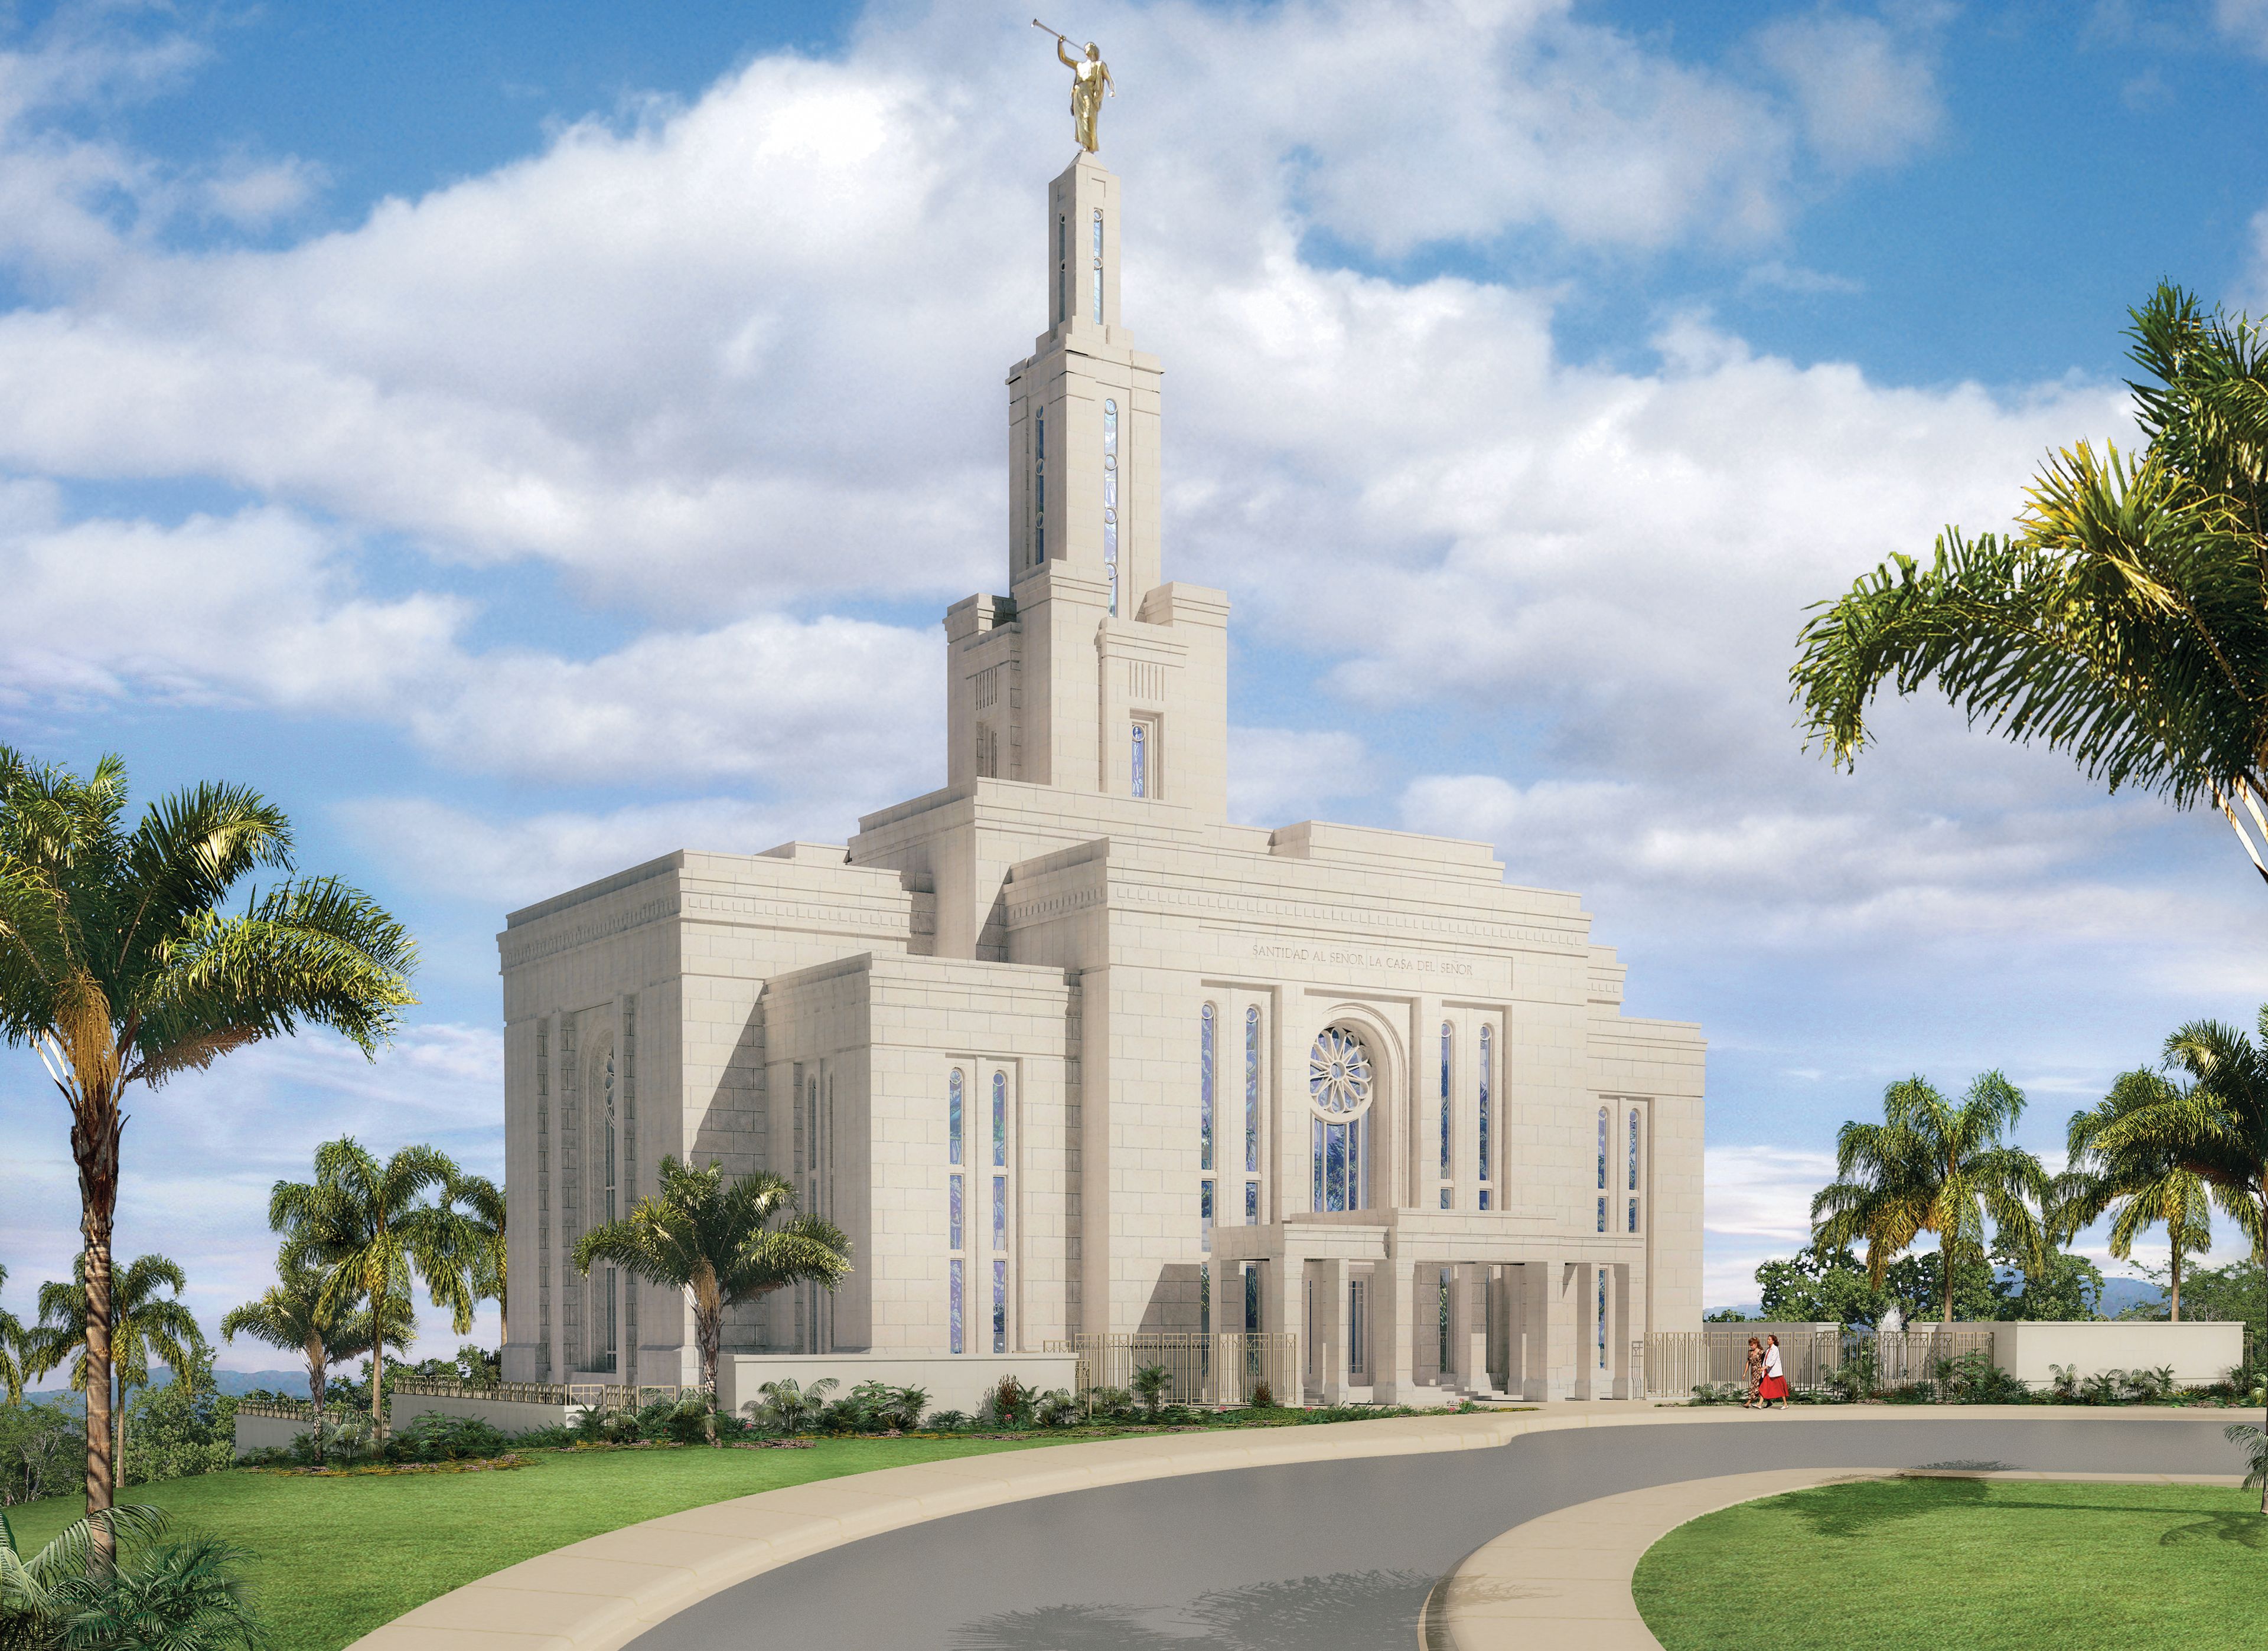 An artist’s rendition of the Panama City Panama Temple, including the entrance and scenery.